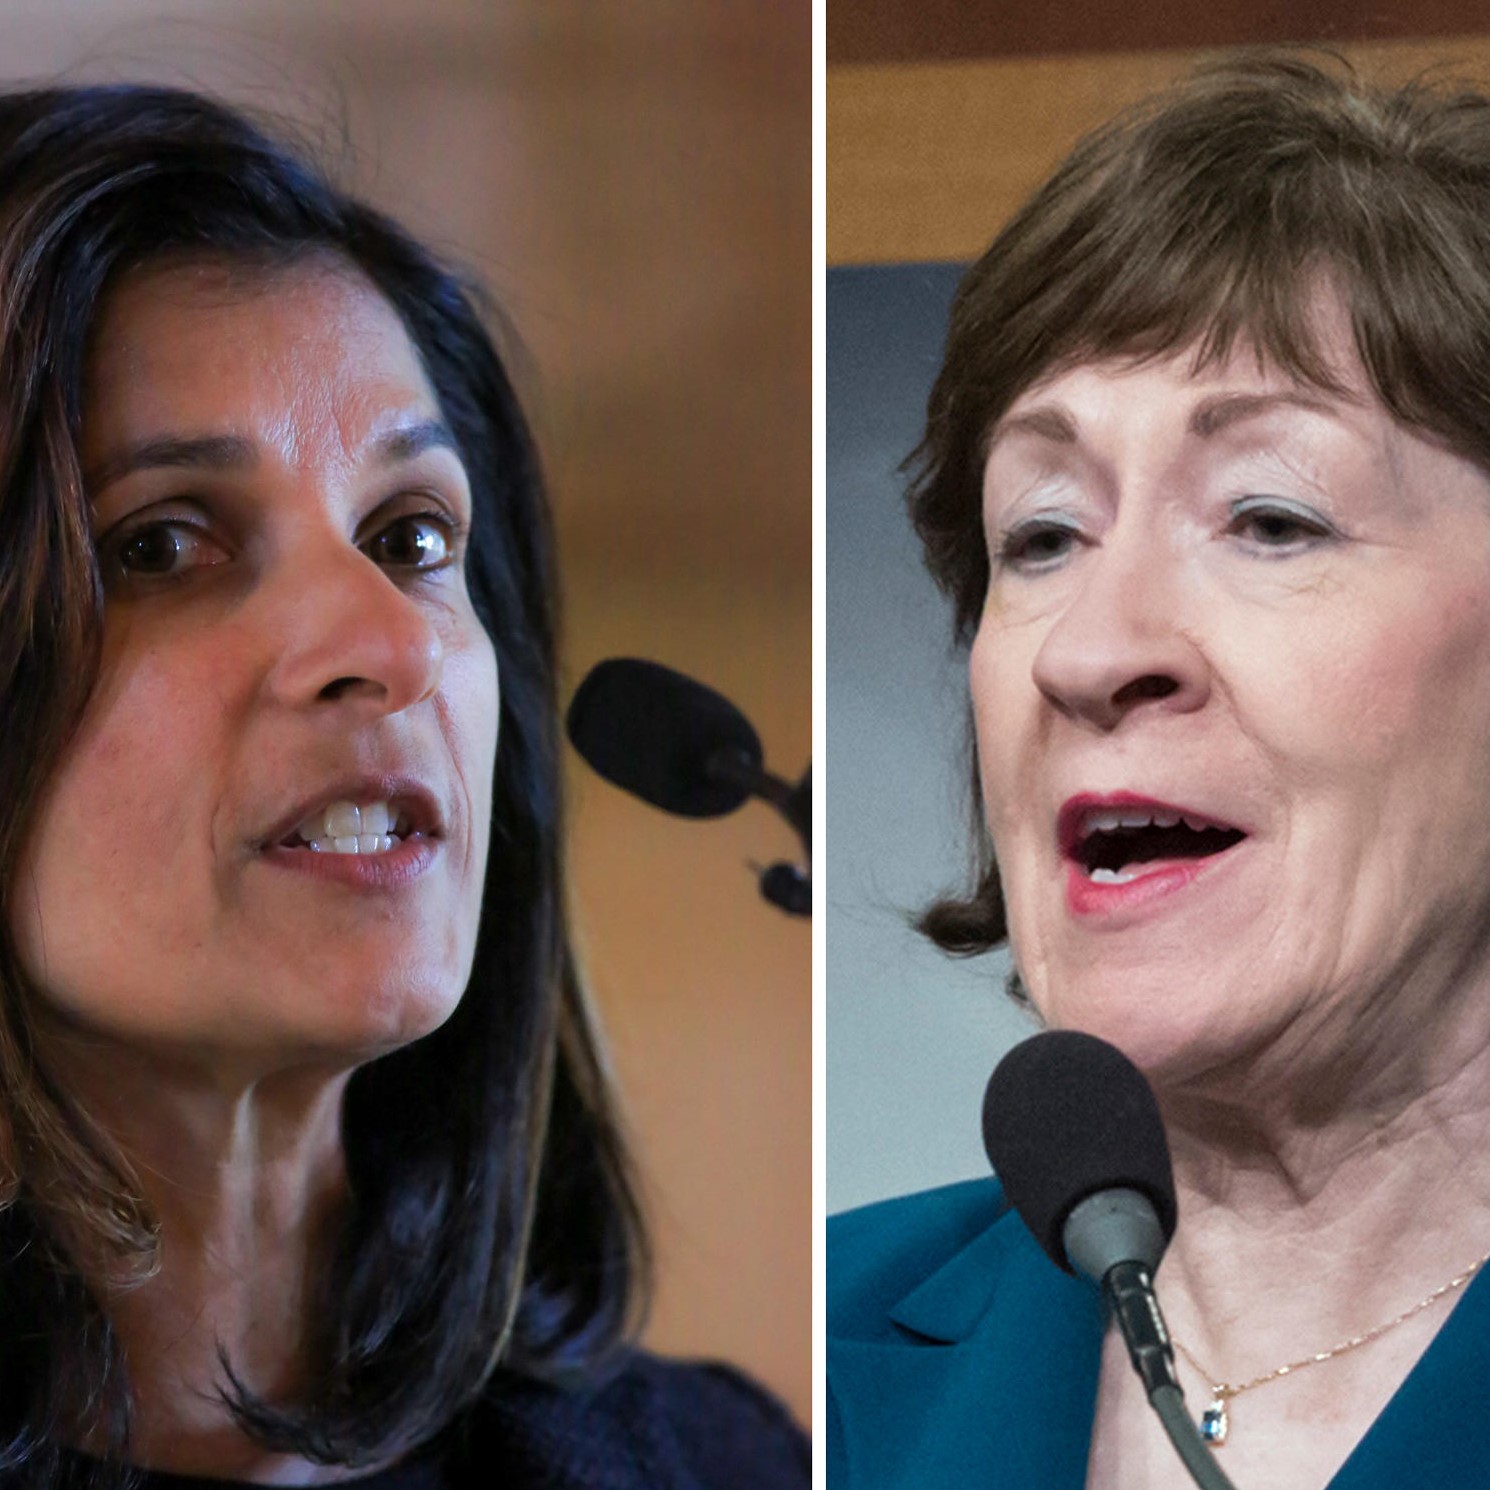 Sara Gideon has opened a lead over Susan Collins in their Senate race